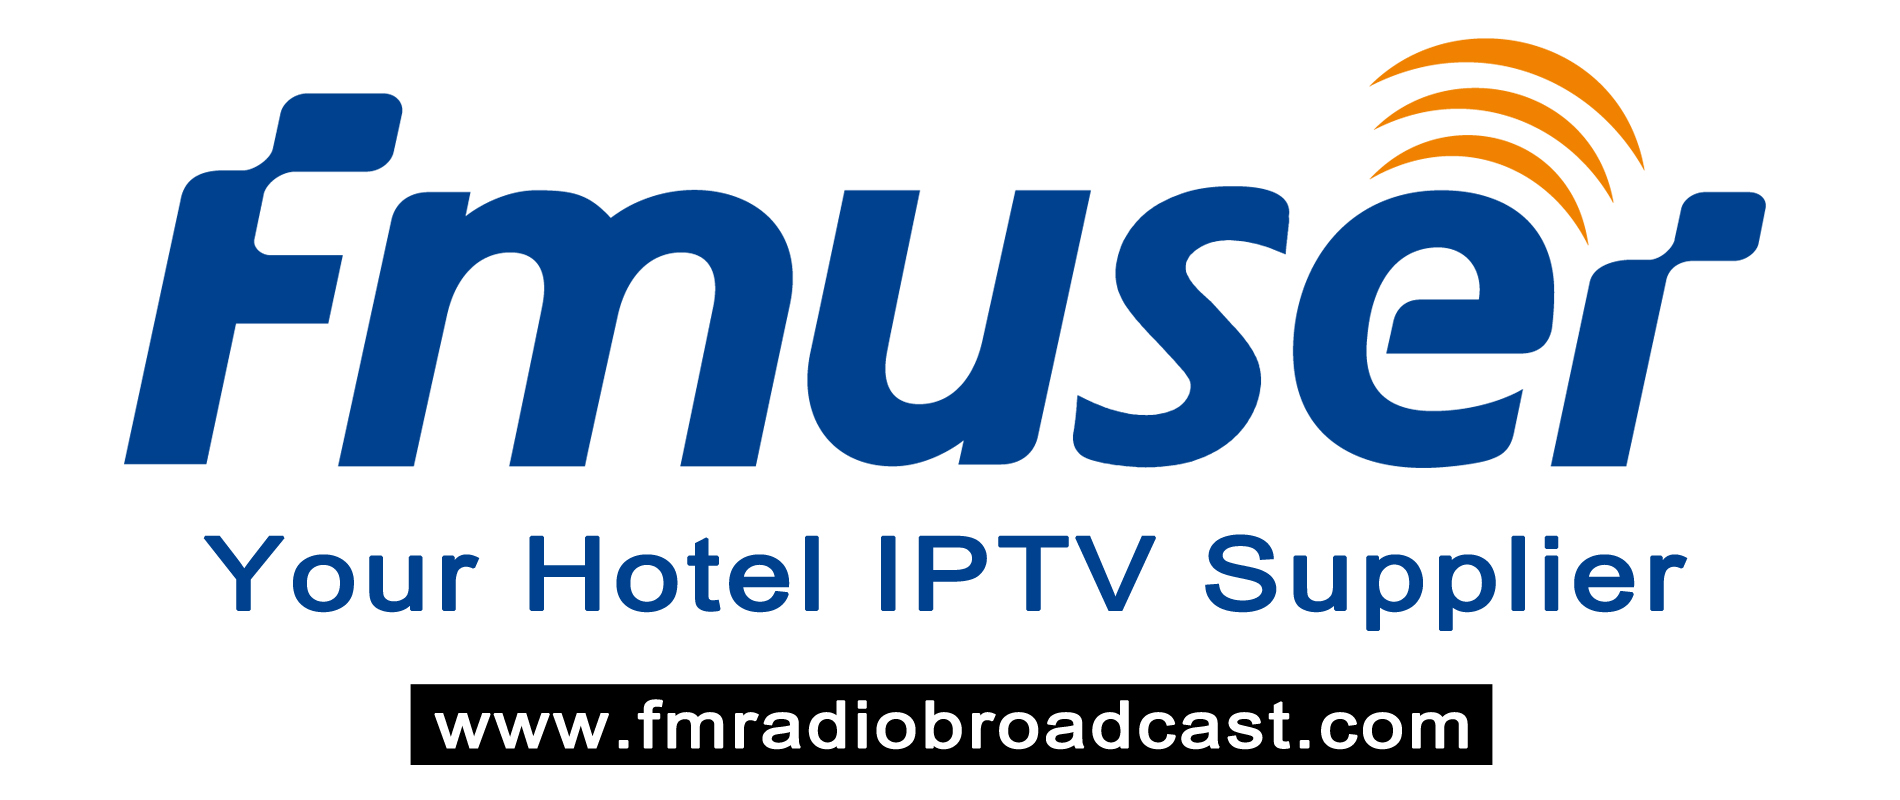 Technical Innovation for Taif Hospitality: FMUSER's Hotel IPTV Solutions in Saudi Arabia